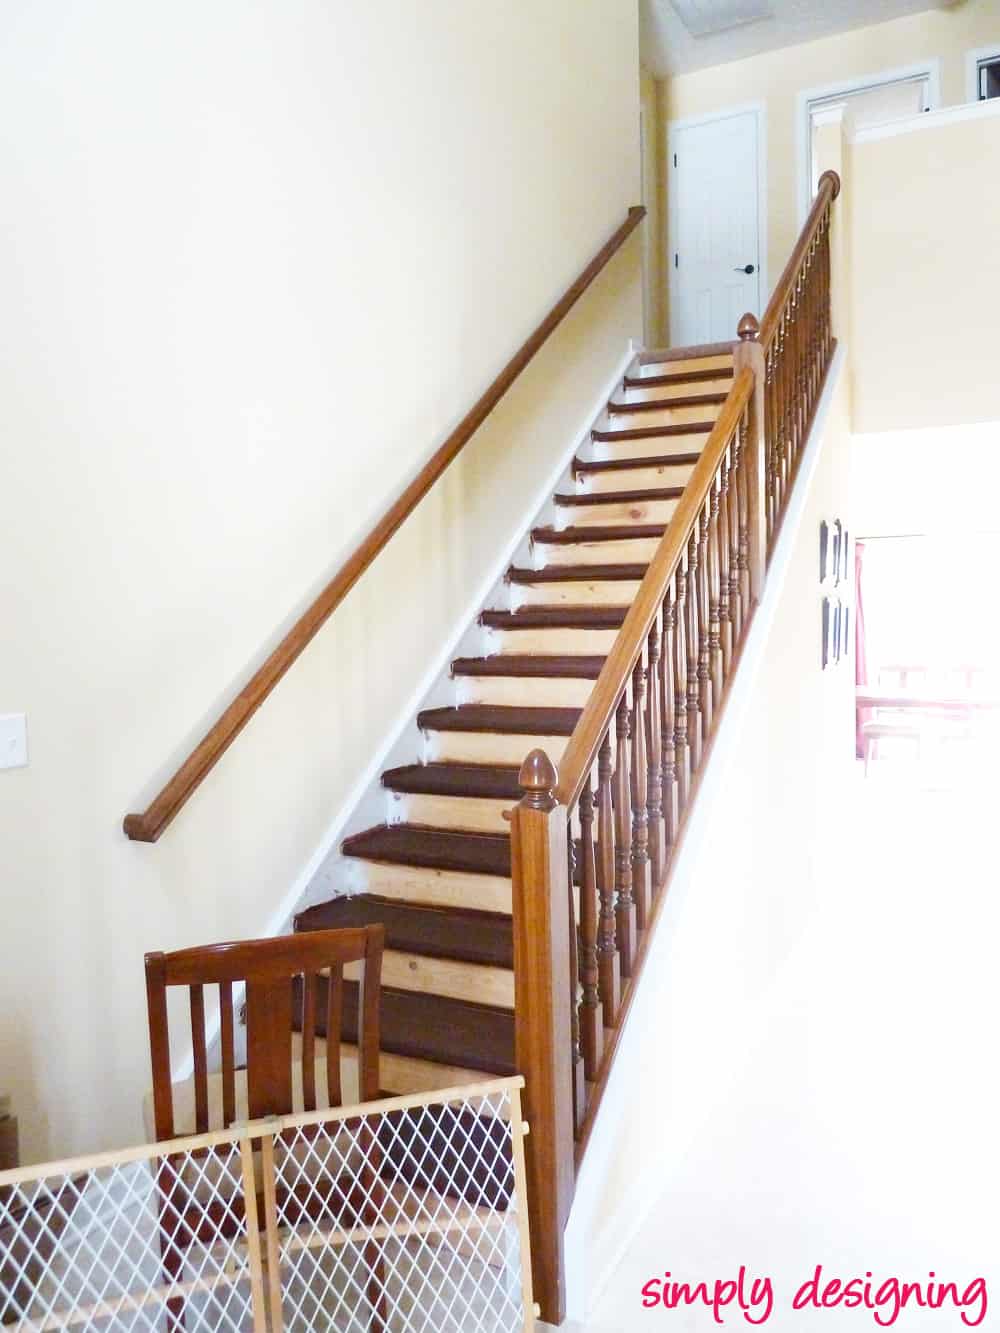 Here's what NOT to do when staining stairs in a staircase make-over - we learned the hard way so you don't have to.